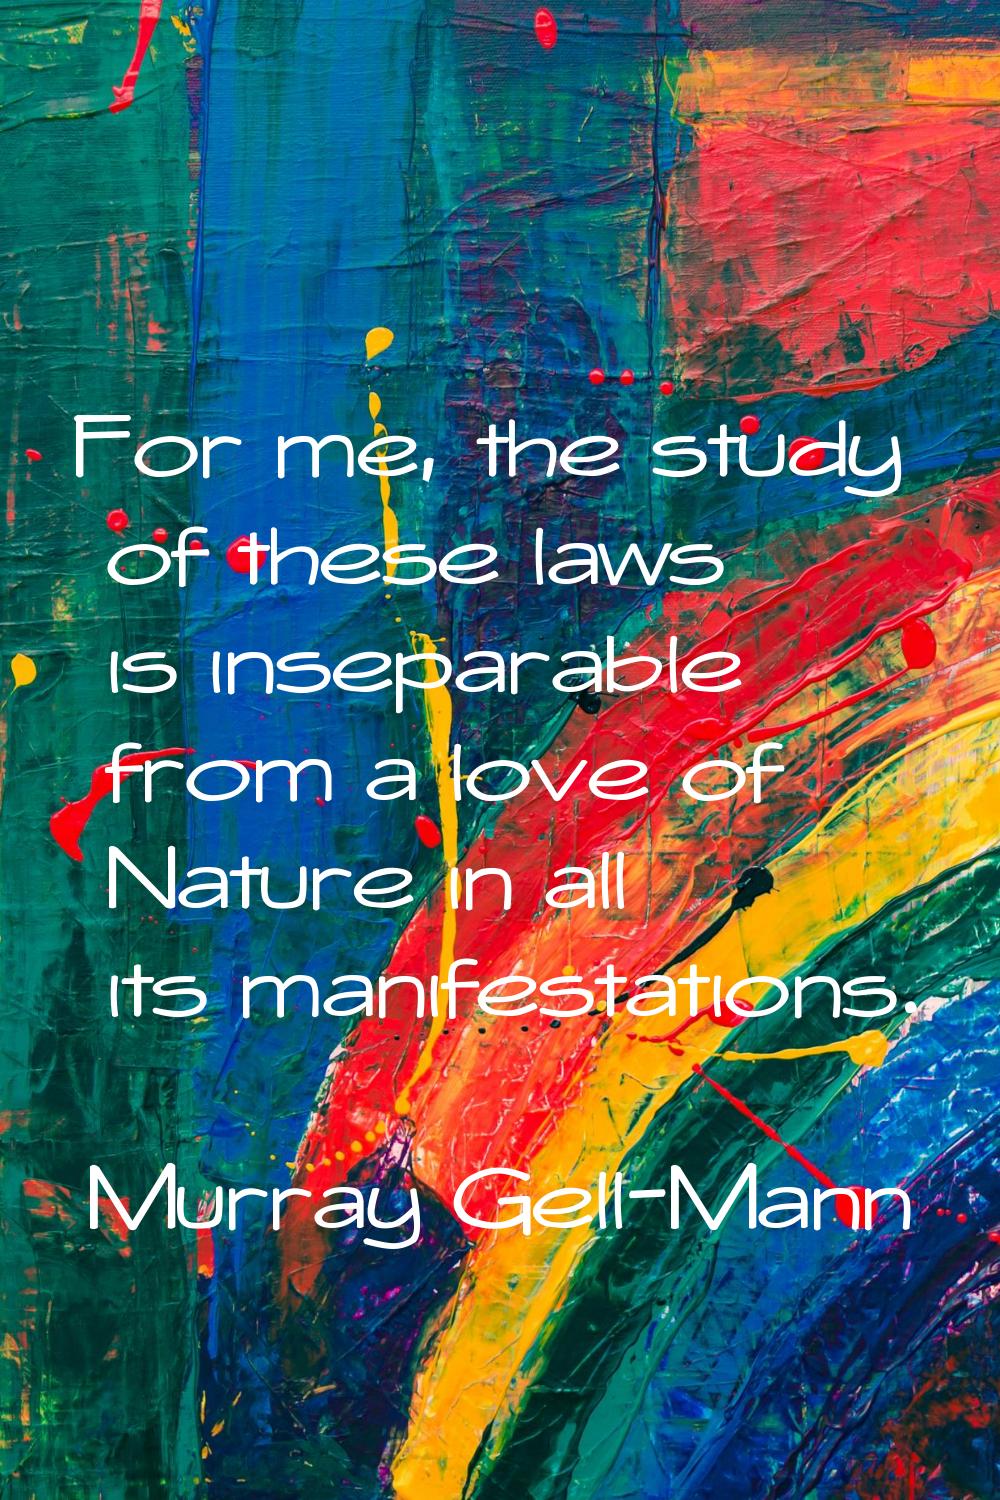 For me, the study of these laws is inseparable from a love of Nature in all its manifestations.